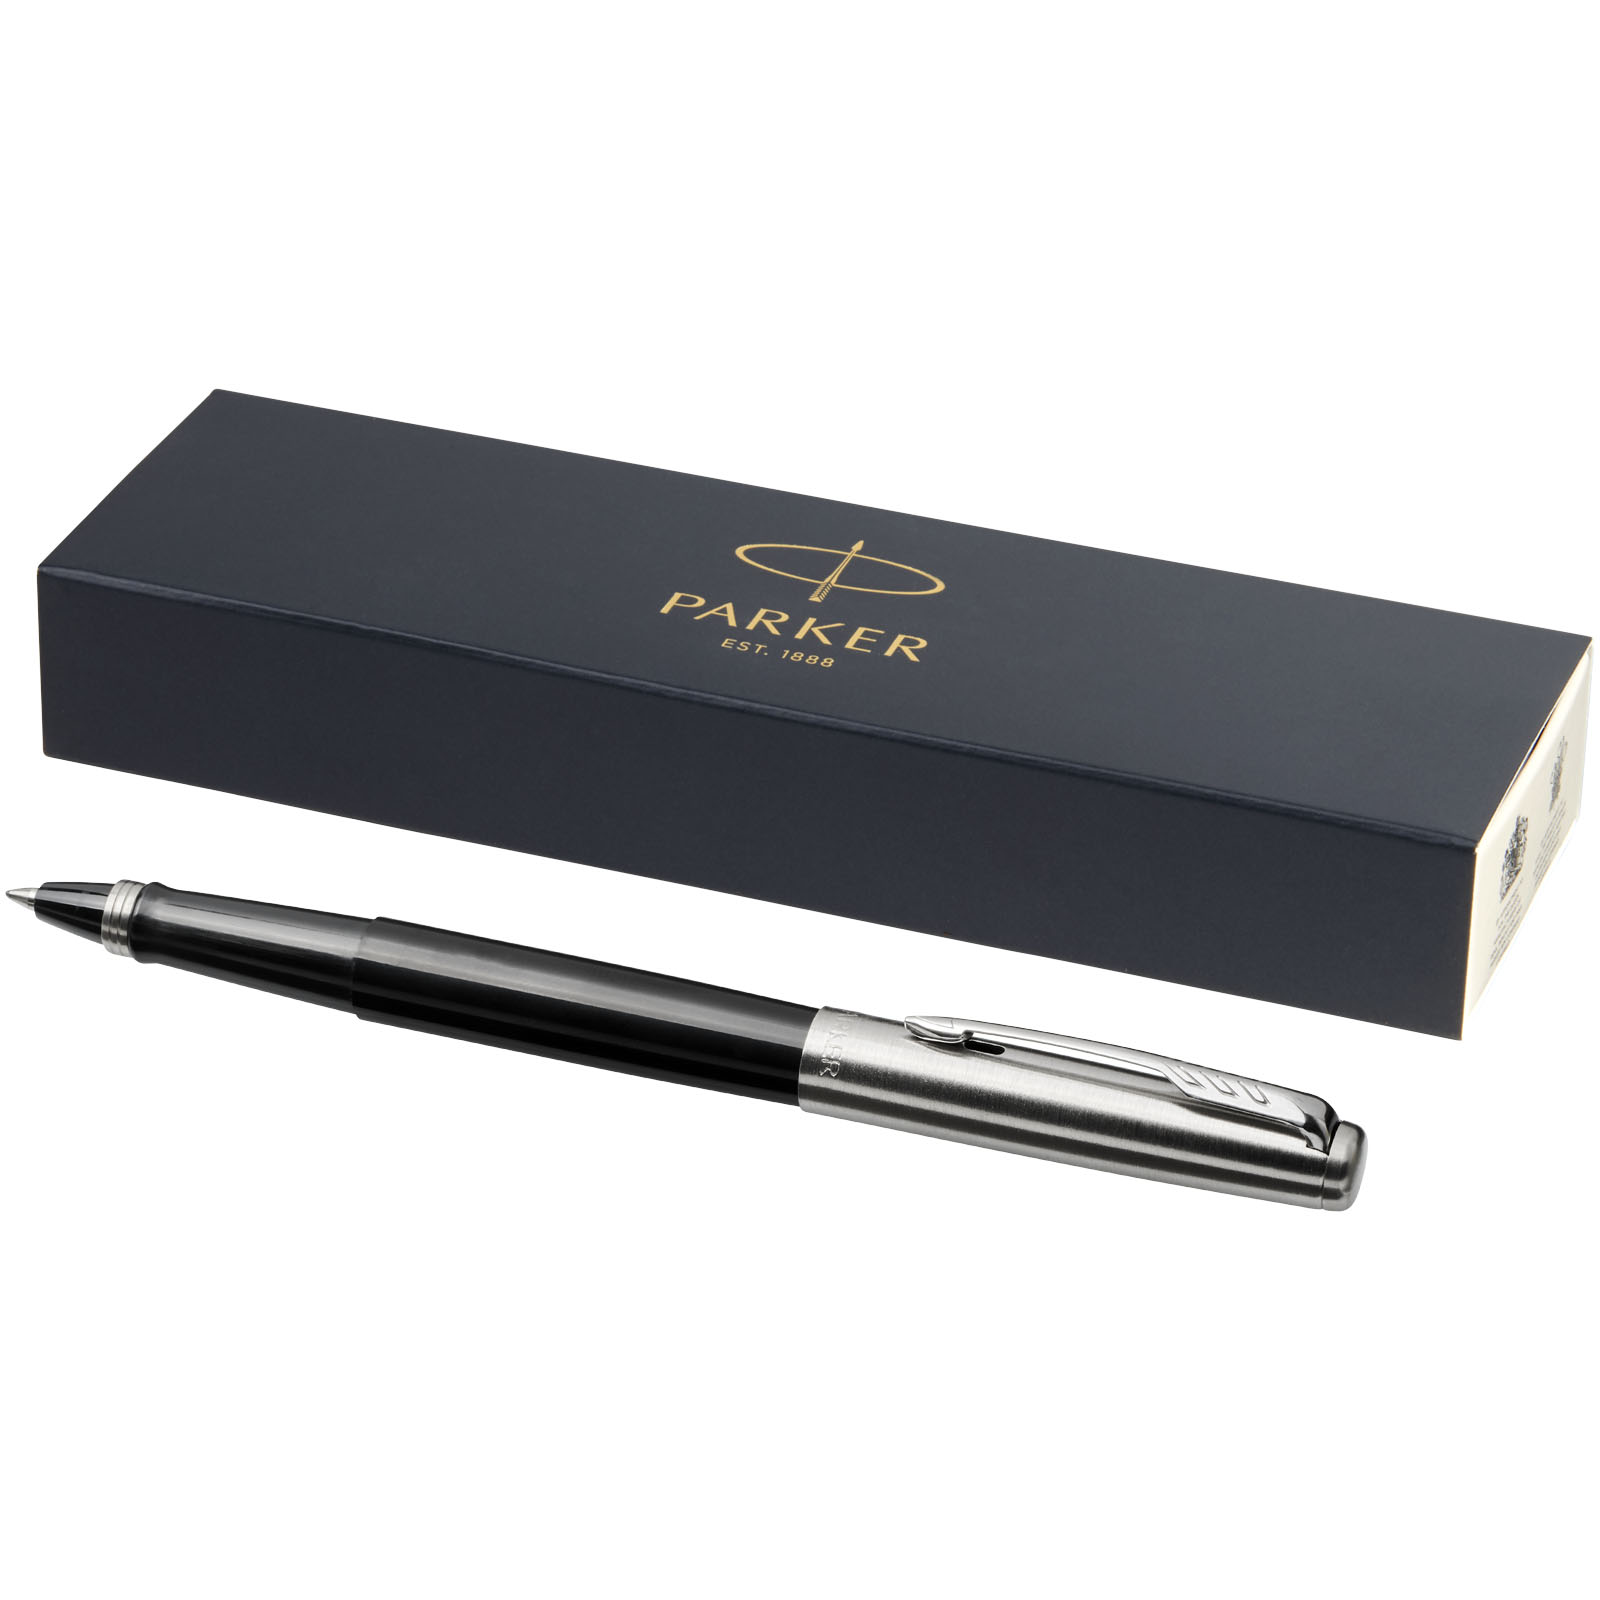 Advertising Rollerball Pens - Parker Jotter plastic with stainless steel rollerball pen - 0